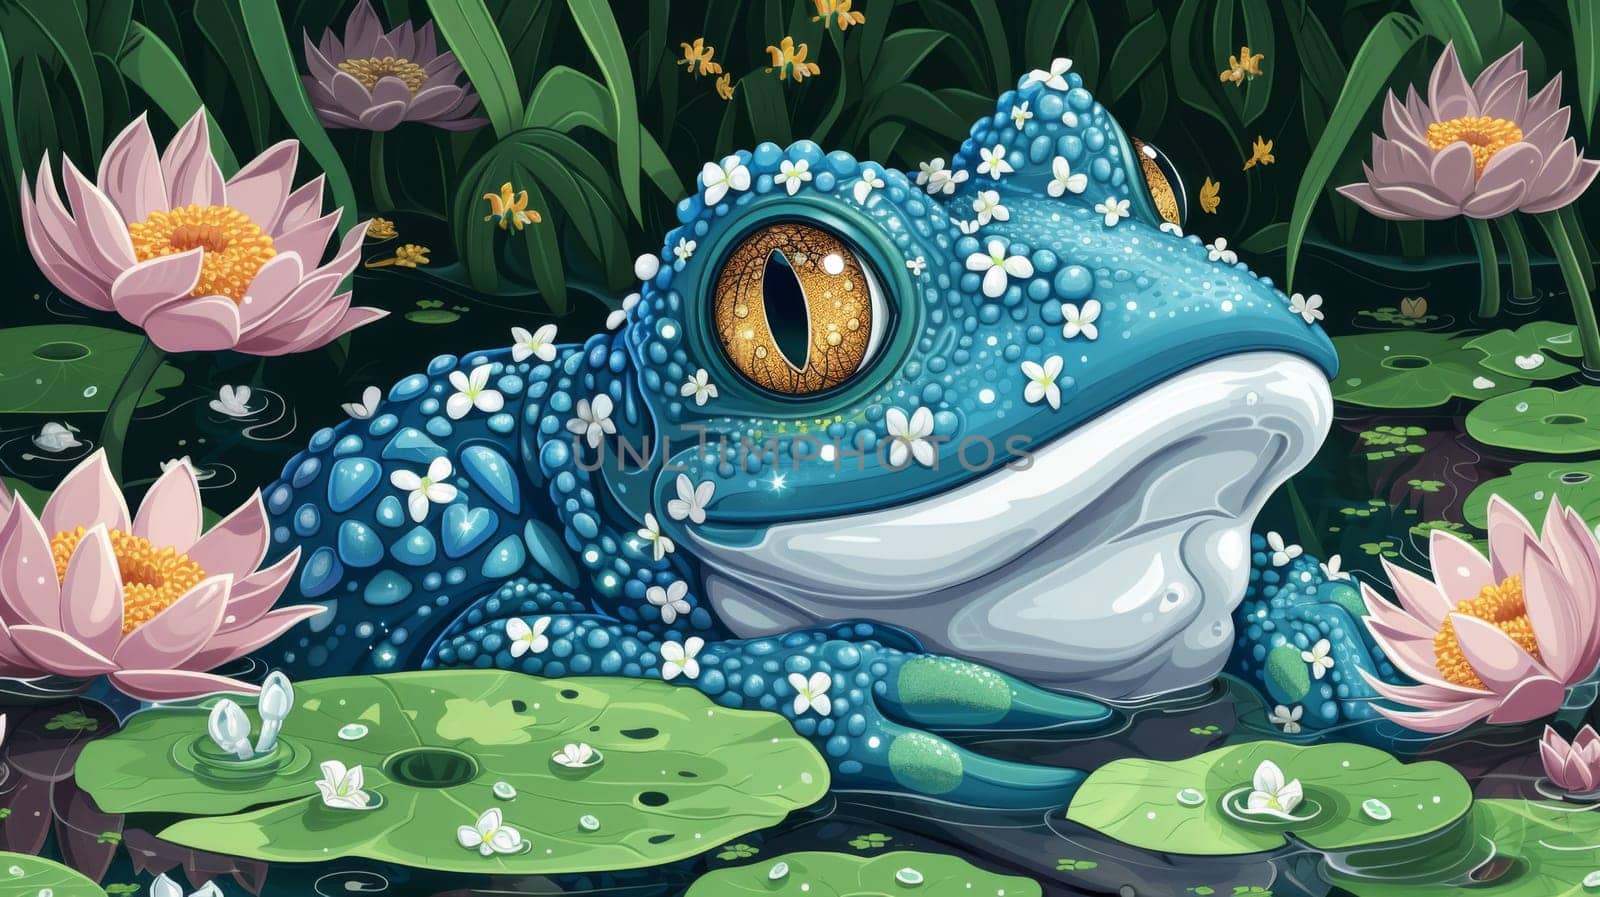 A blue frog sitting in a pond surrounded by lily pads, AI by starush